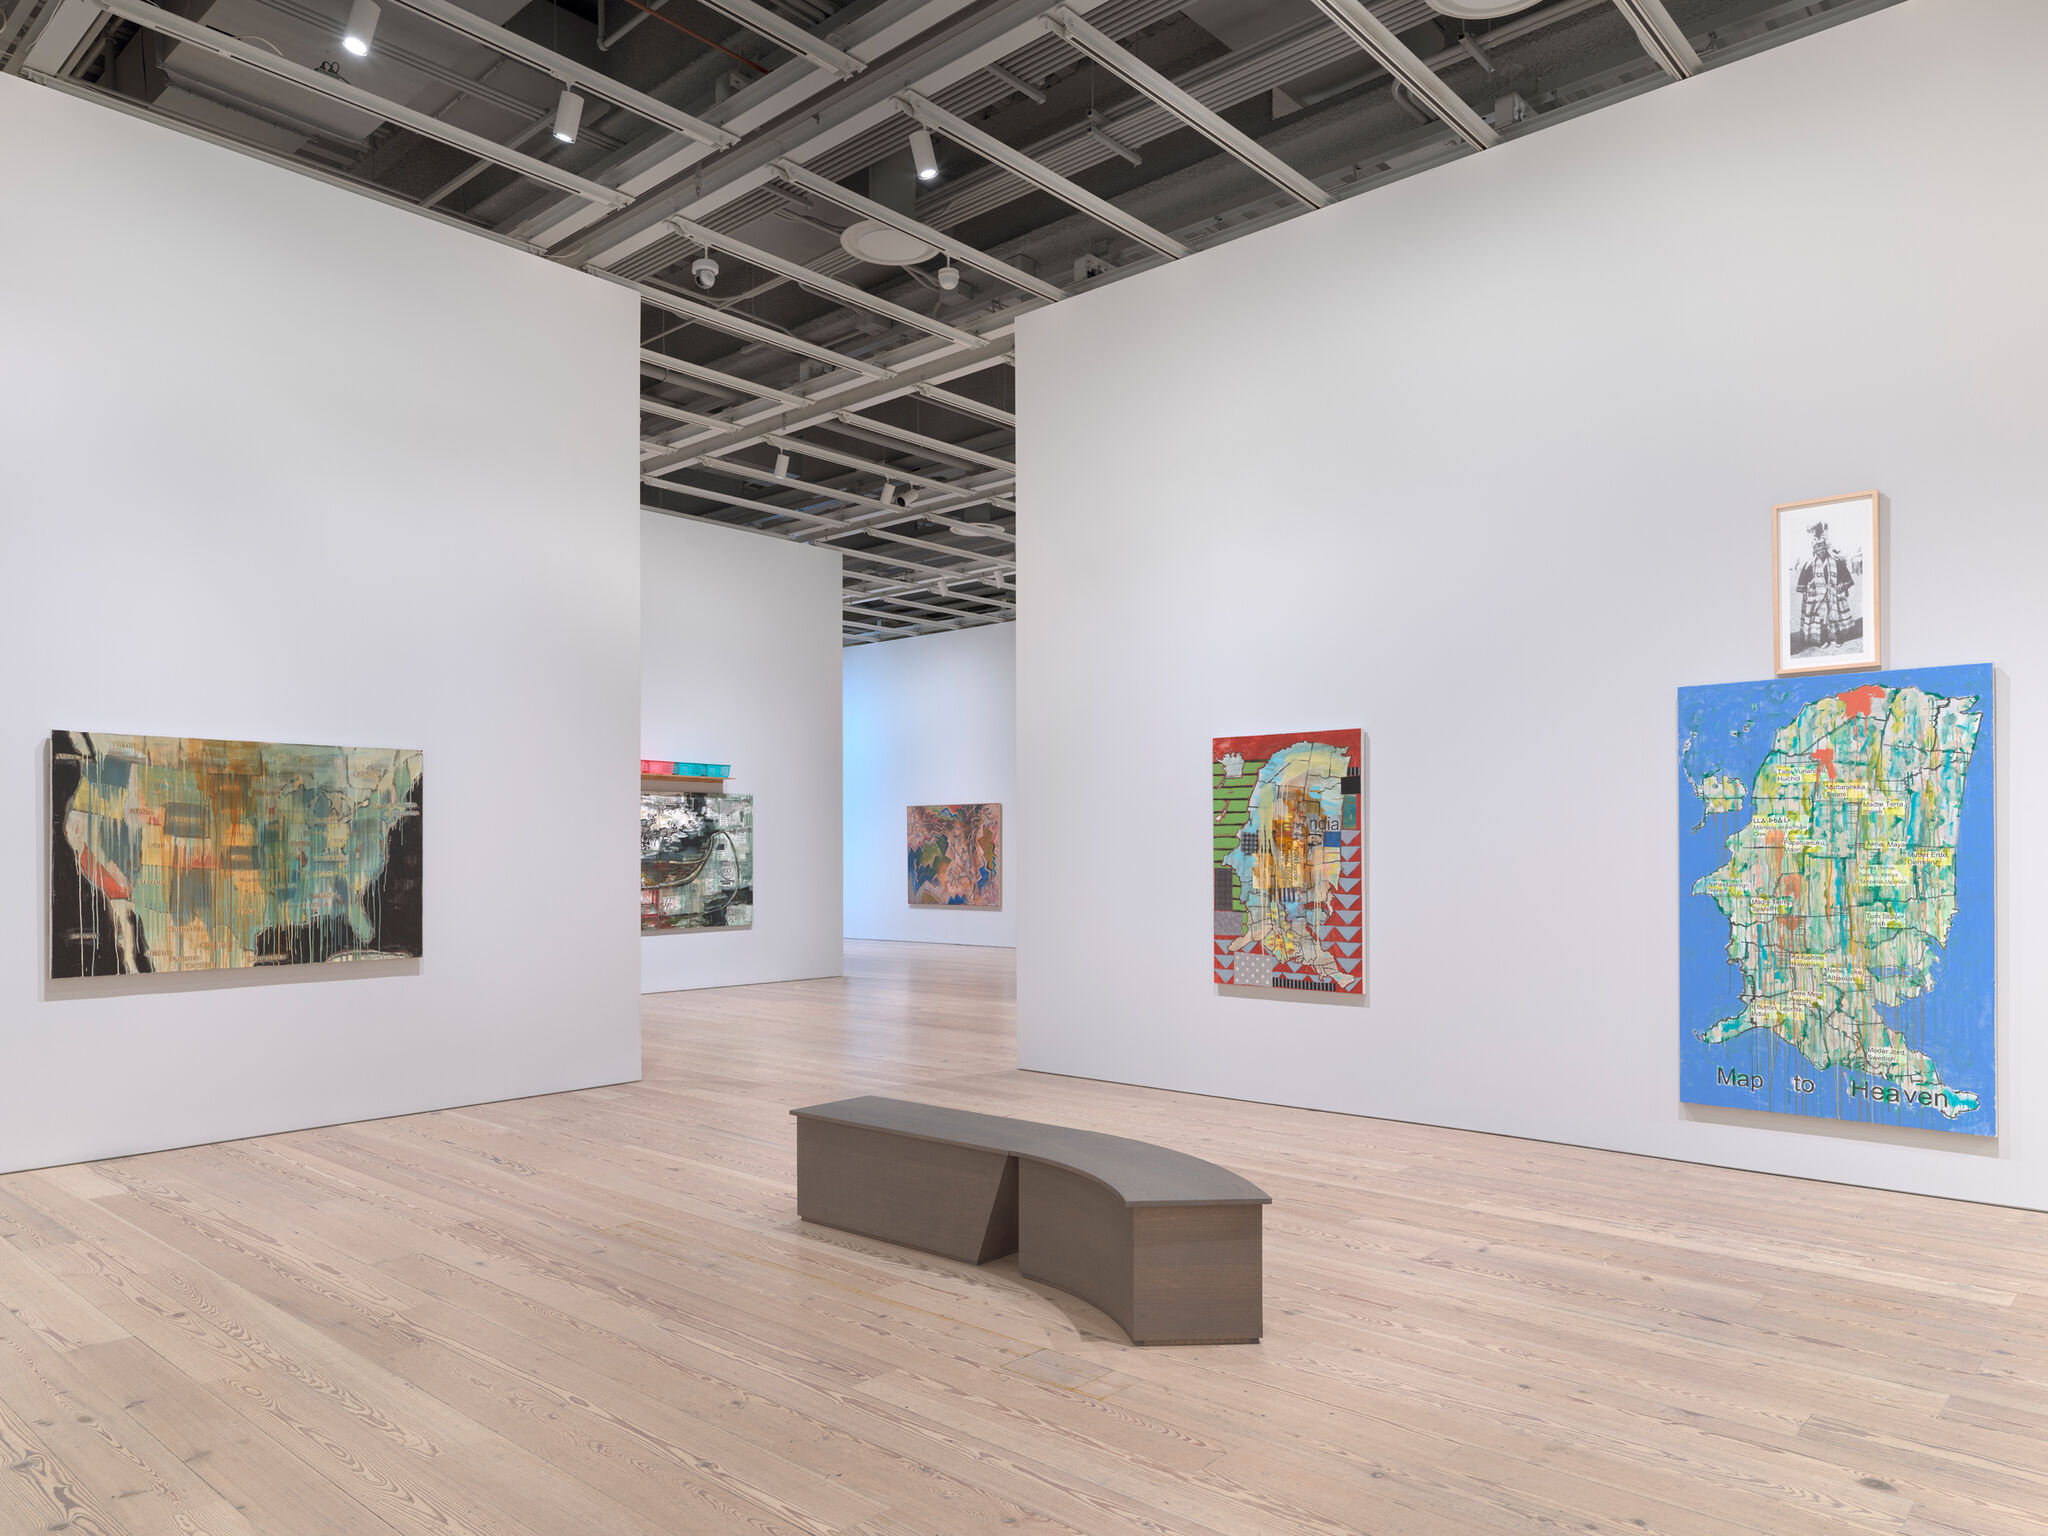 A view of a gallery with large paintings on the walls many of which depict maps. 